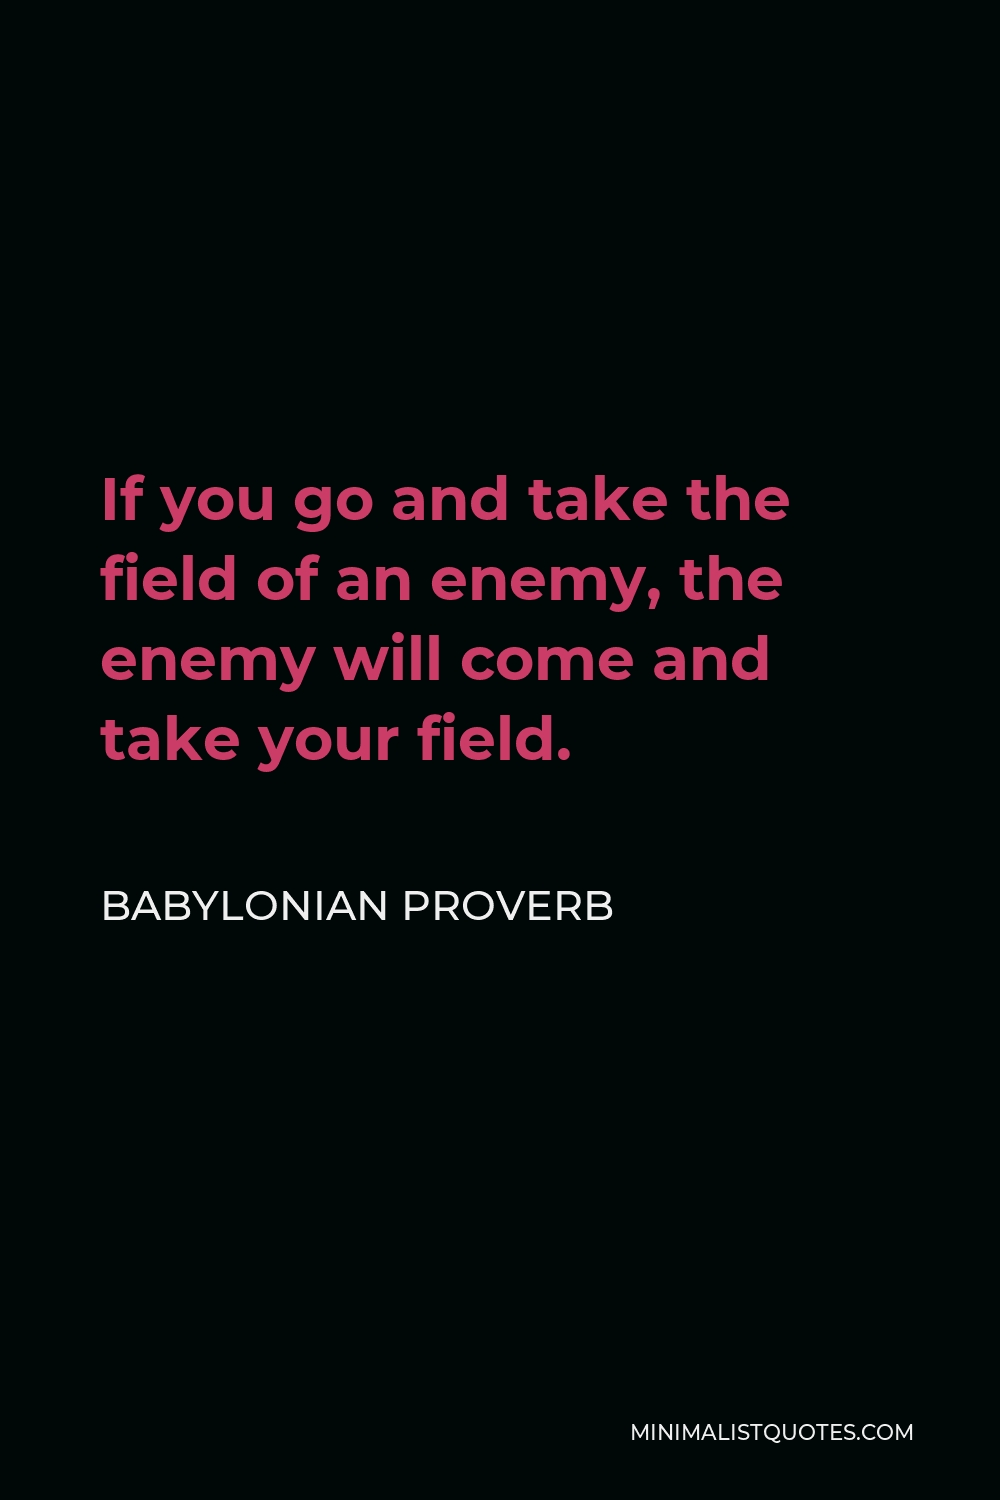 Babylonian Proverb Quote - If you go and take the field of an enemy, the enemy will come and take your field.